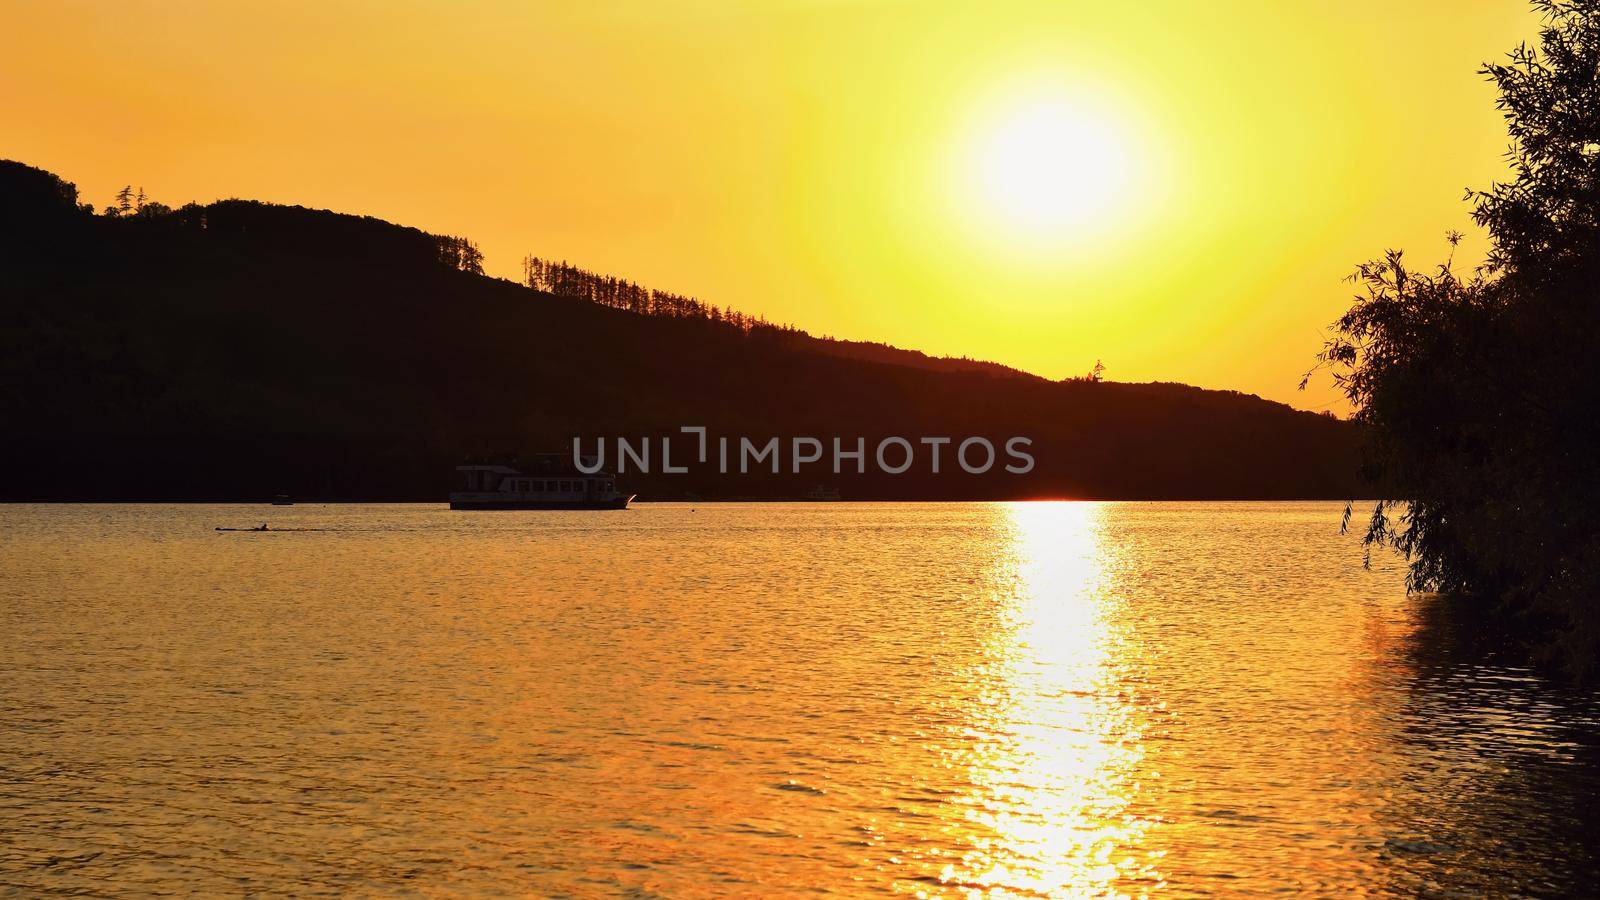 Brno dam. The city of Brno-Europe. Beautiful sunset by water with a boat. by Montypeter